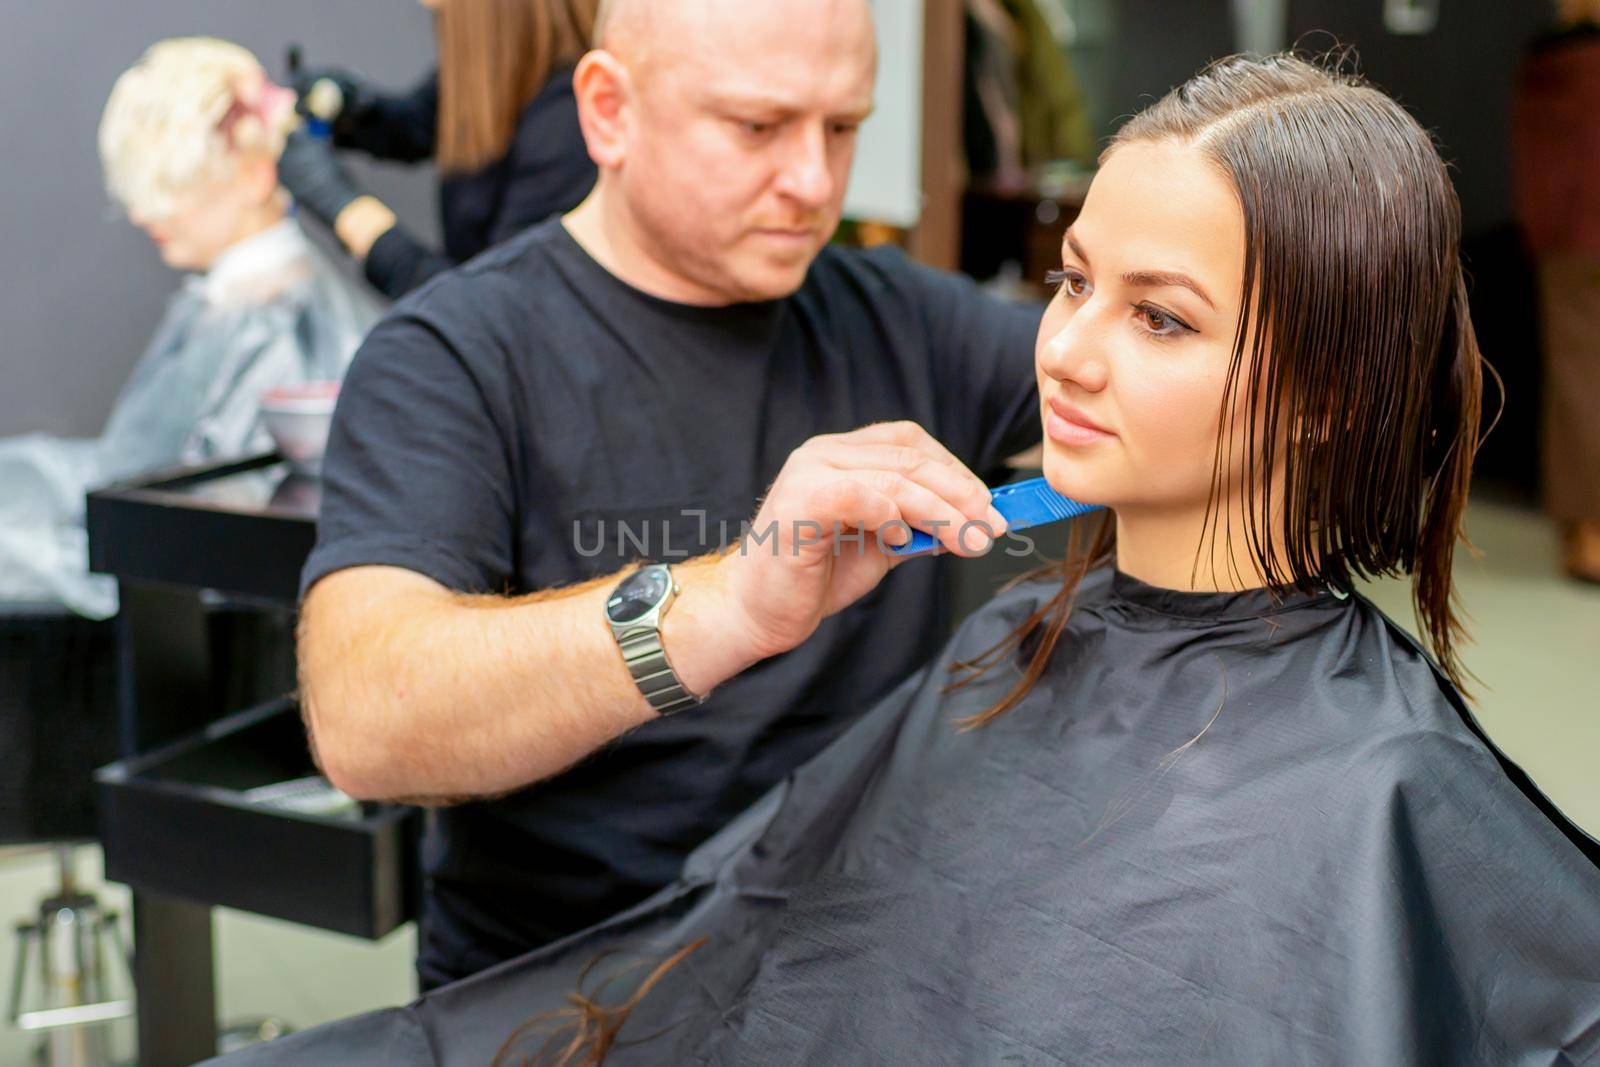 Haircut of long wet hair of young caucasian woman by a male hairdresser in a hair salon